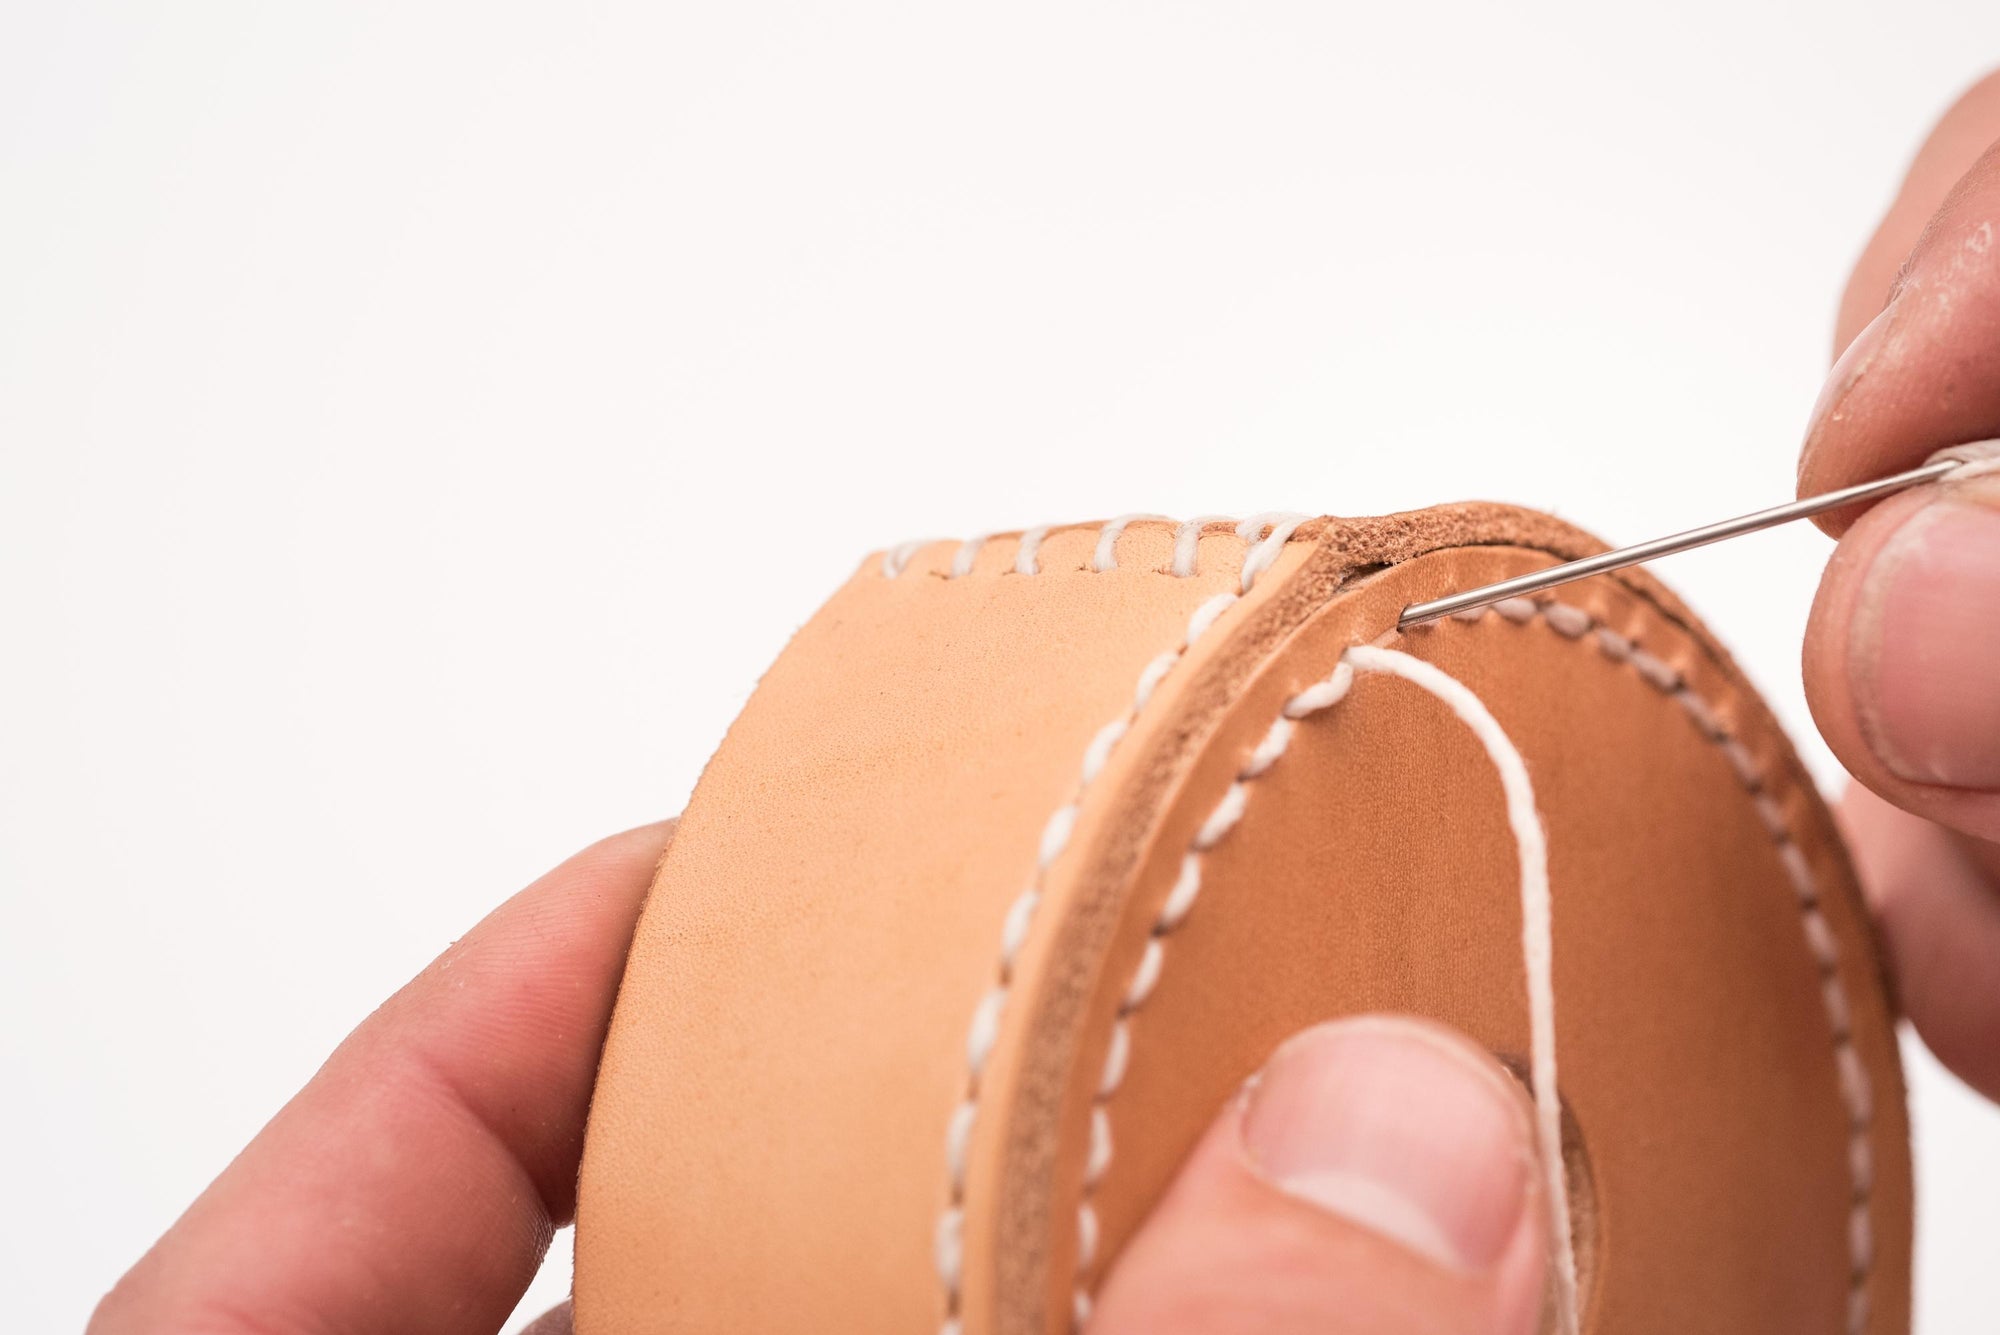 In the store: tips for spotting craftsmanship details and leather quality